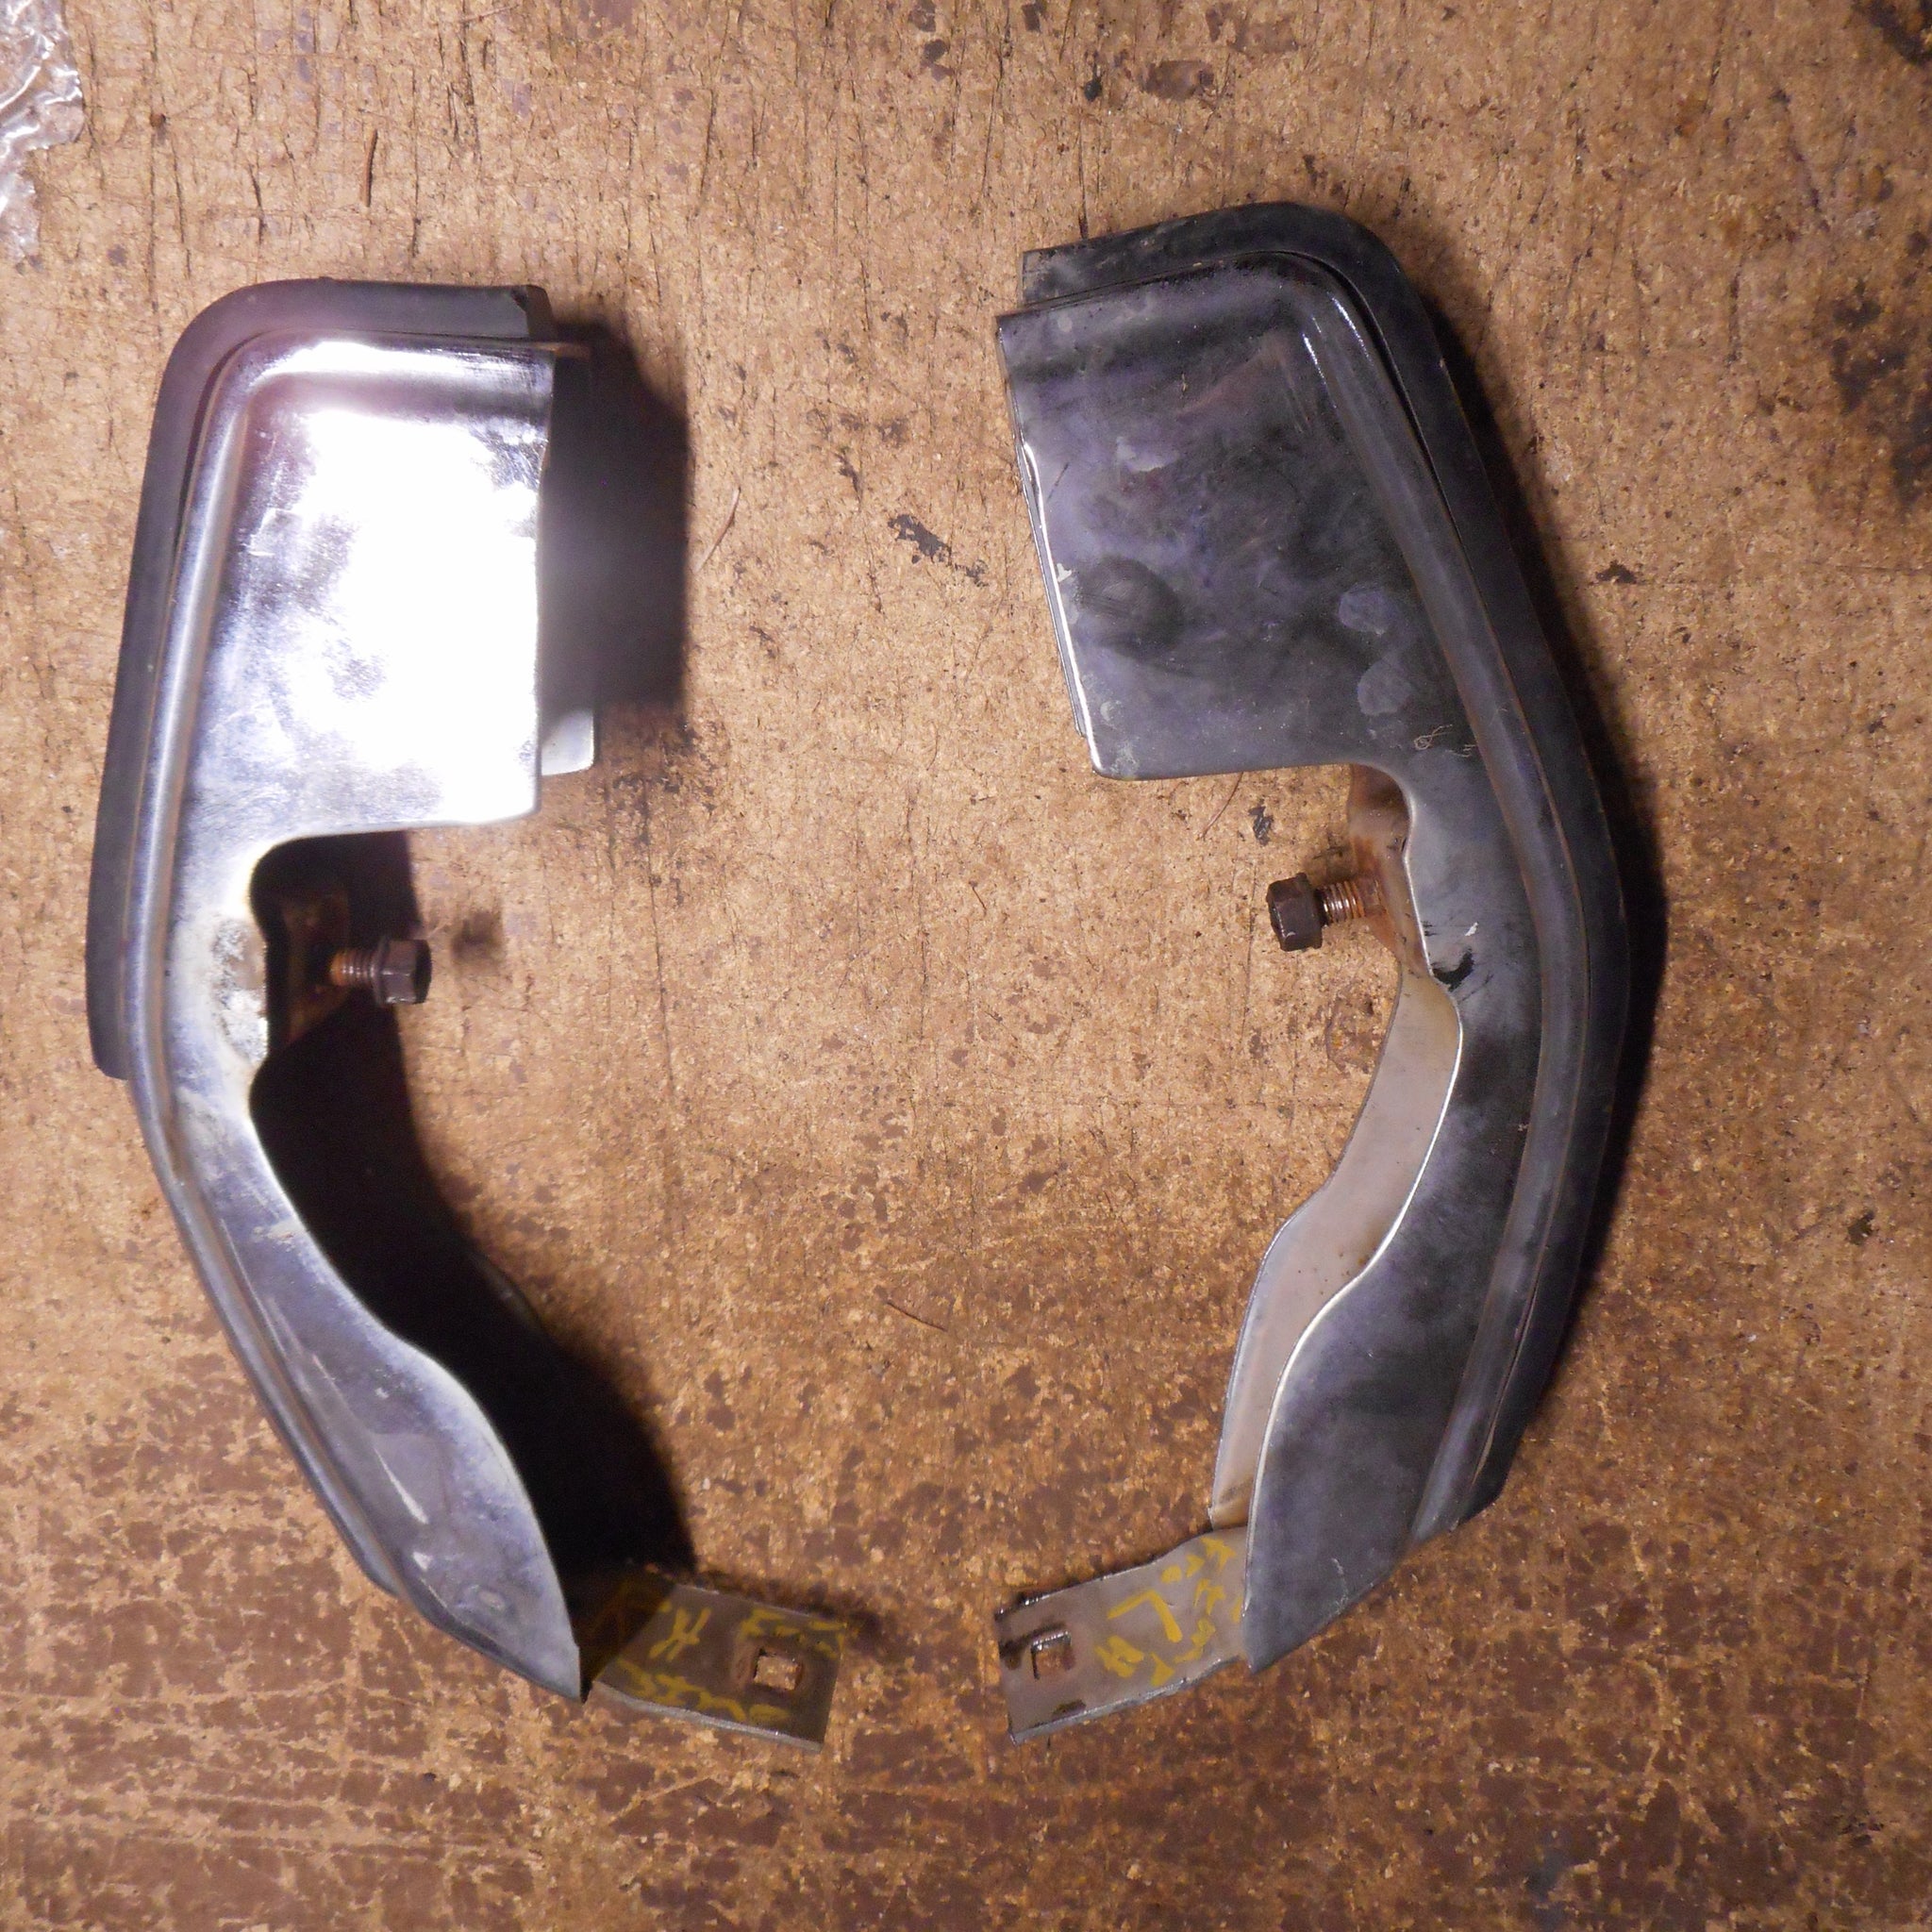 FRONT BUMPER GUARDS ,USED 73 CAPRICE IMPALA